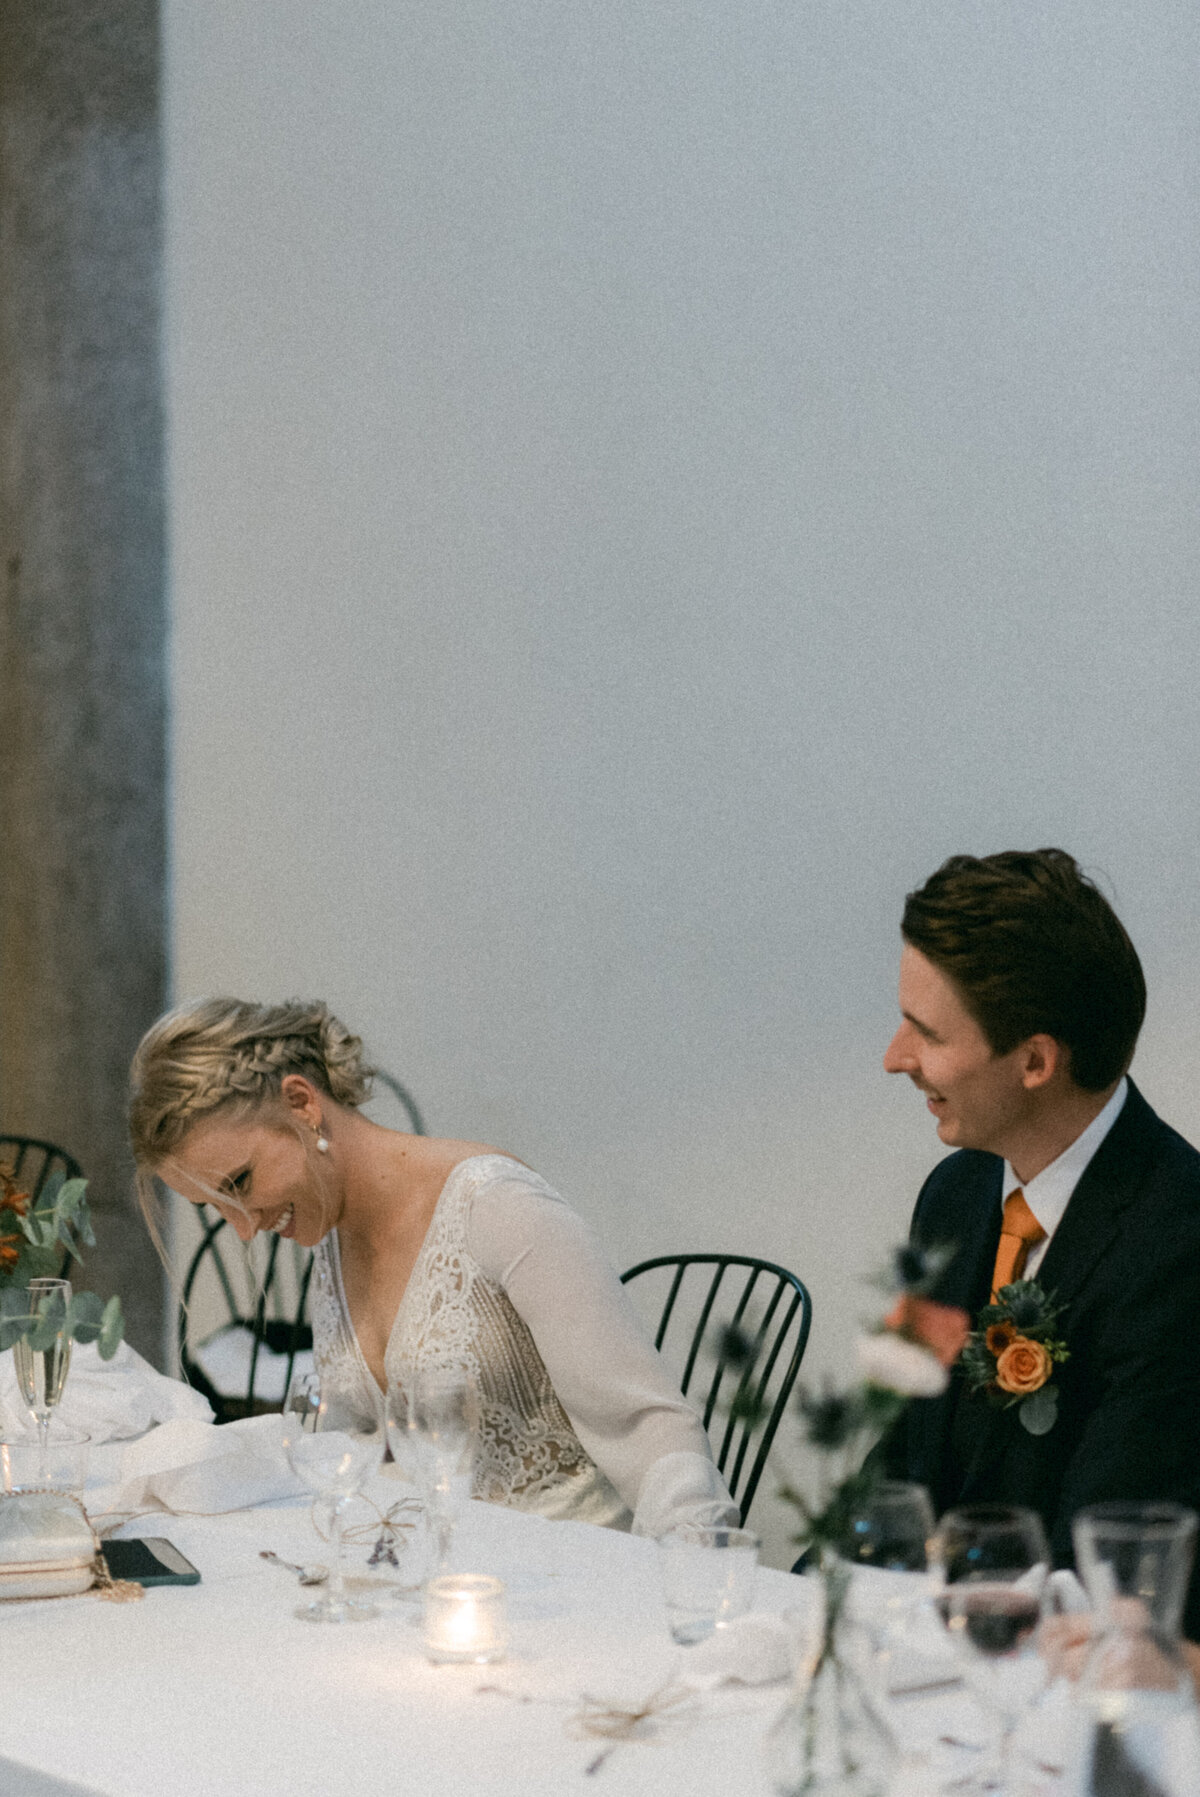 A documentary wedding  photo of the bride and groom laughing at a speech in Oitbacka gård captured by wedding photographer Hannika Gabrielsson in Finland